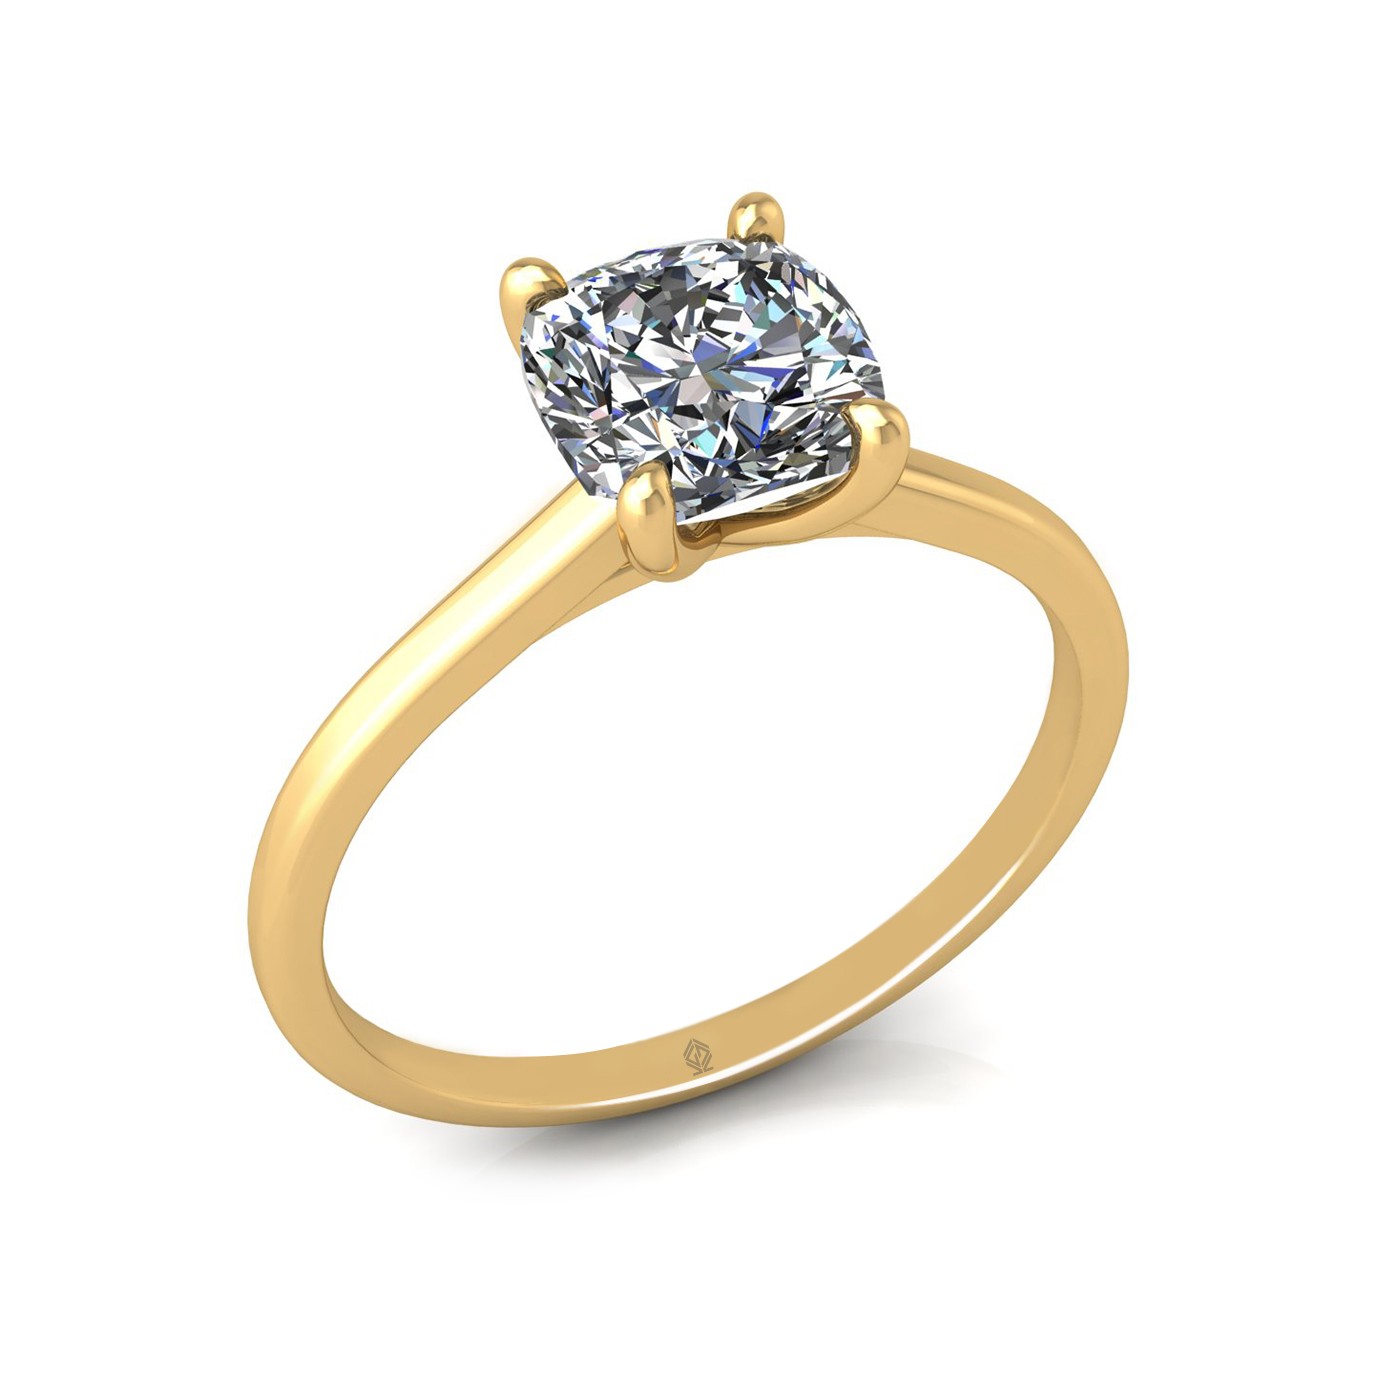 18k yellow gold 1.5ct 4 prongs solitaire cushion cut diamond engagement ring with whisper thin band